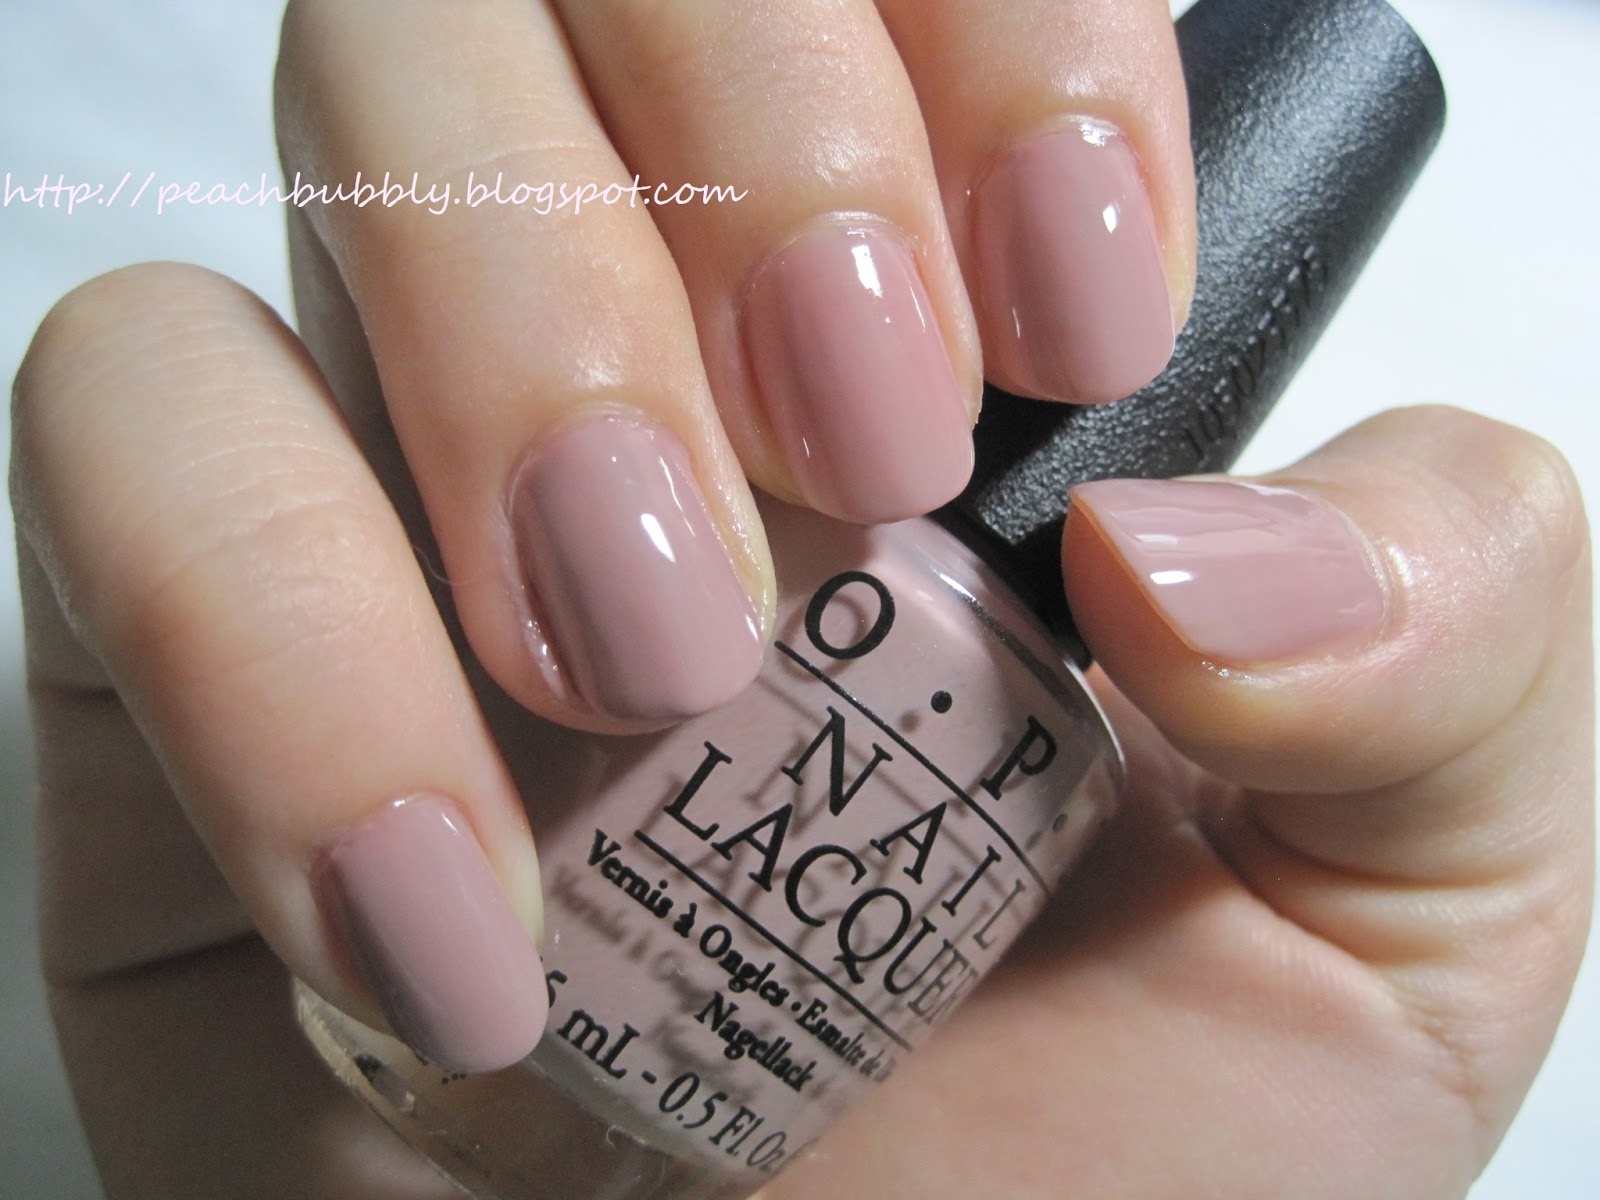 8. OPI GelColor in "Tickle My France-y" - wide 1